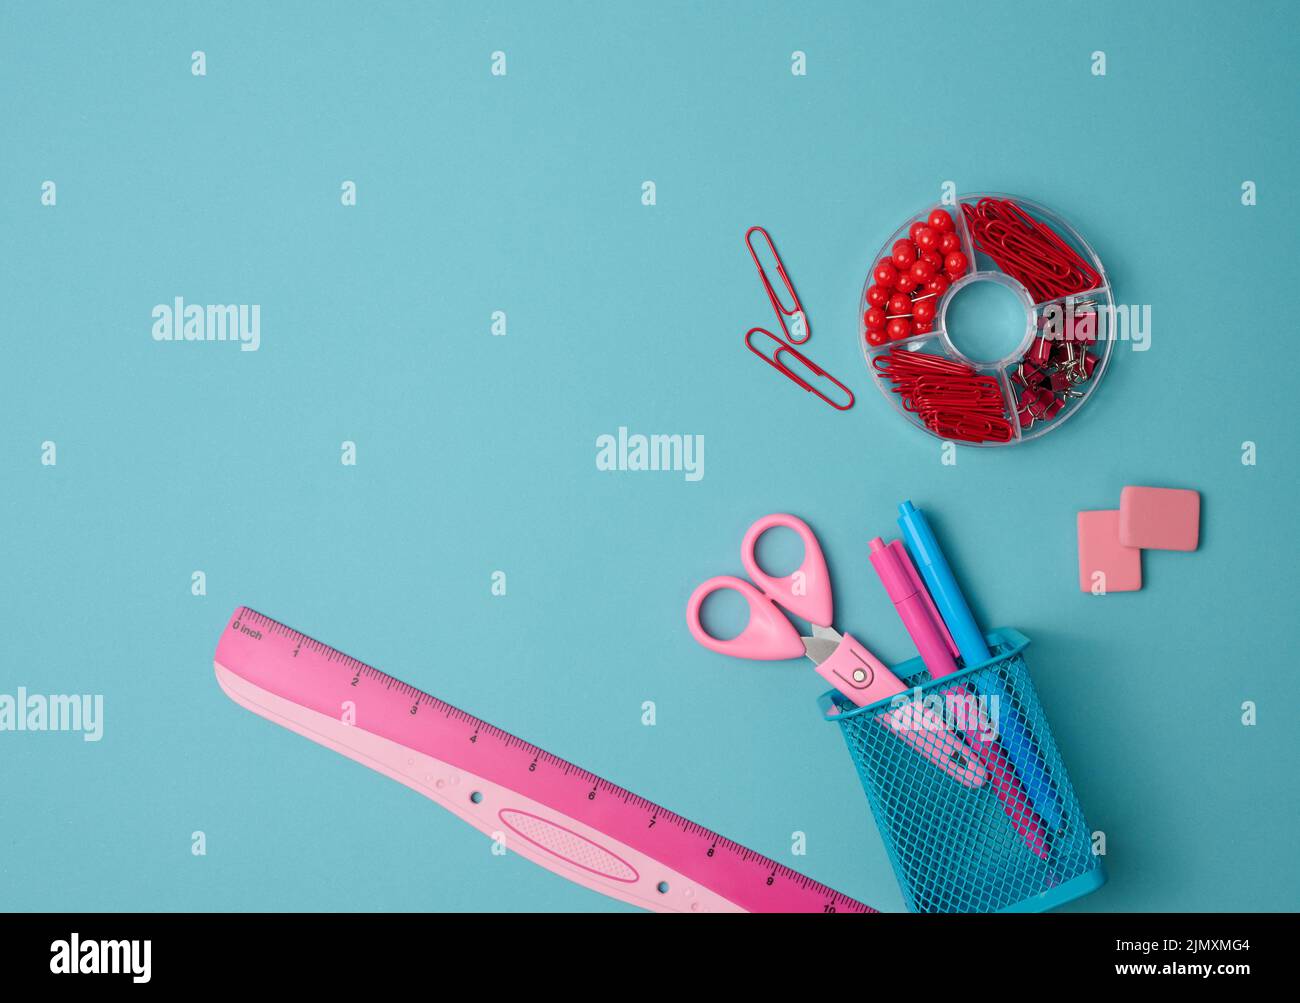 Paper clips, buttons, scissors on blue background, top view Stock Photo